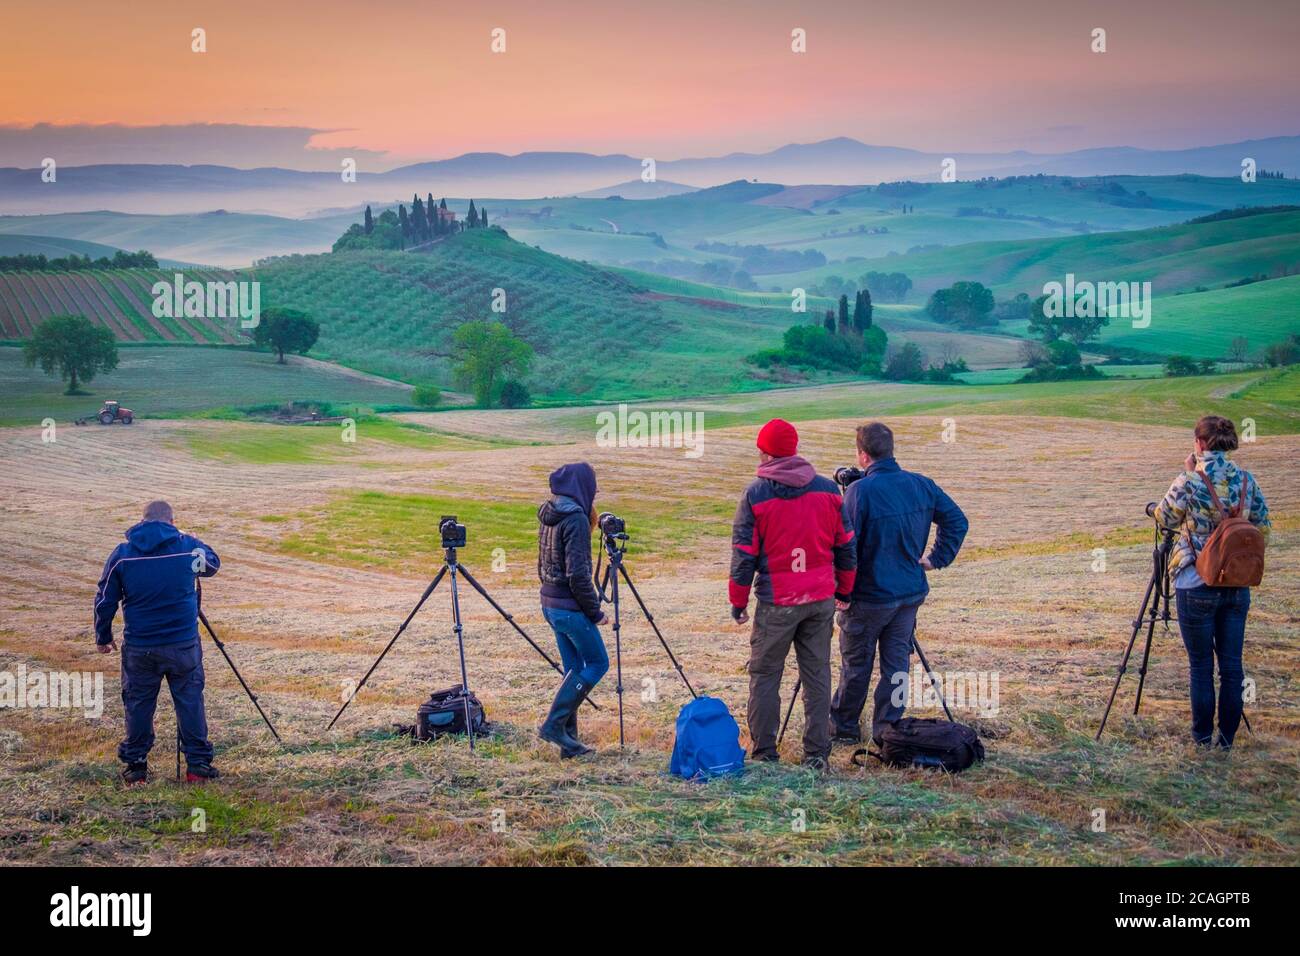 Photographers are waiting for the best moment to take pictures, Podere Belvedere, Orcia Valley, Siena district, Tuscany, Italy, Europe. Stock Photo